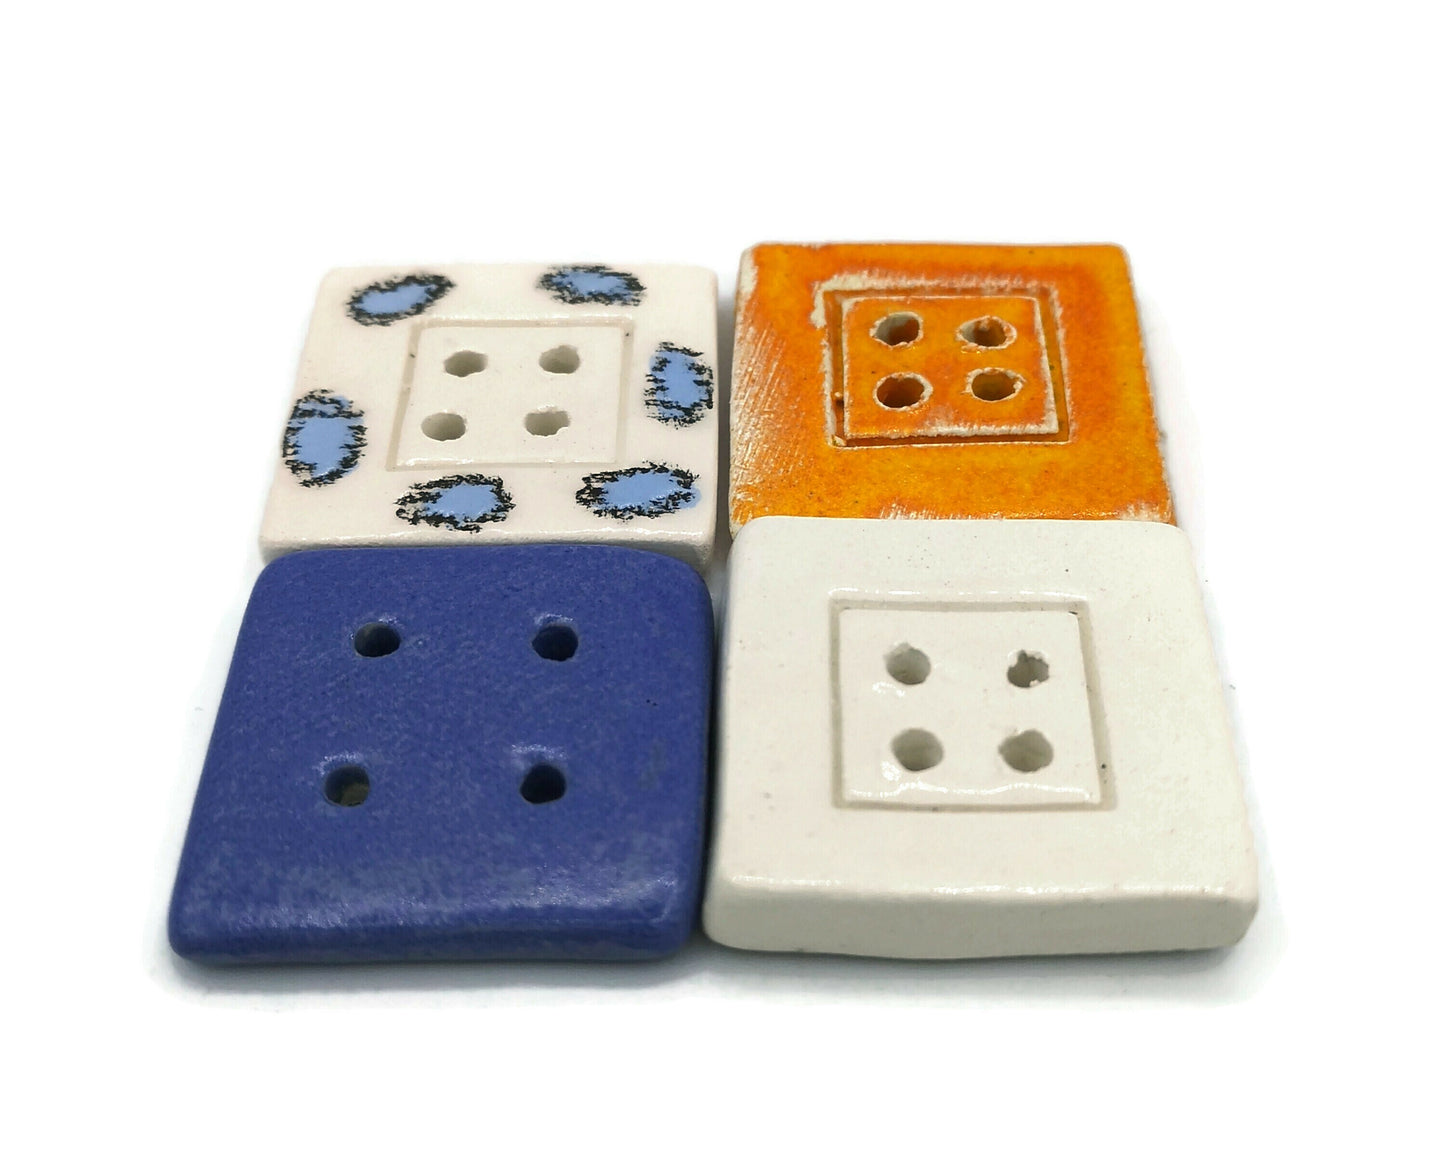 Large Square Buttons, Handmade Ceramic Buttons Set Of 4 Novelty Sewing Buttons - Ceramica Ana Rafael